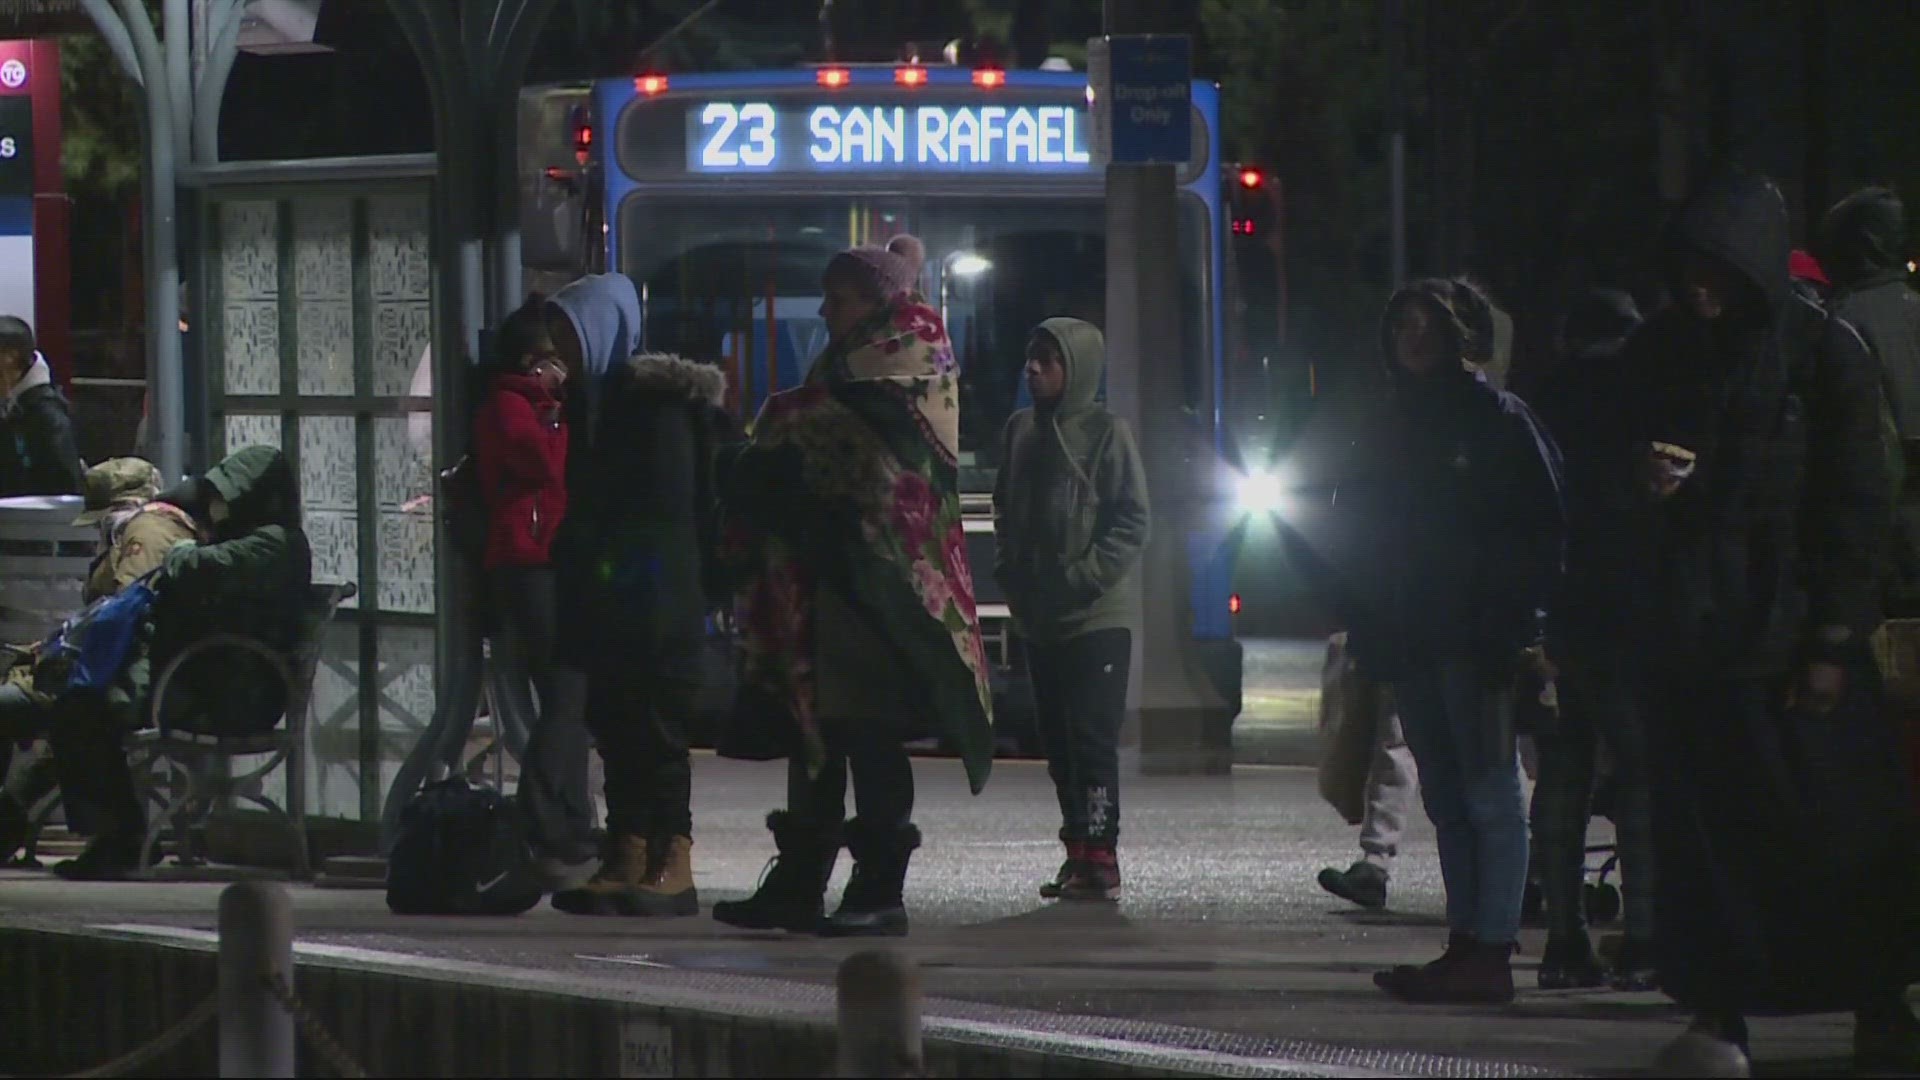 TriMet said that travelers who ride the MAX Blue, Green and Red lines should use alternative modes of transportation.